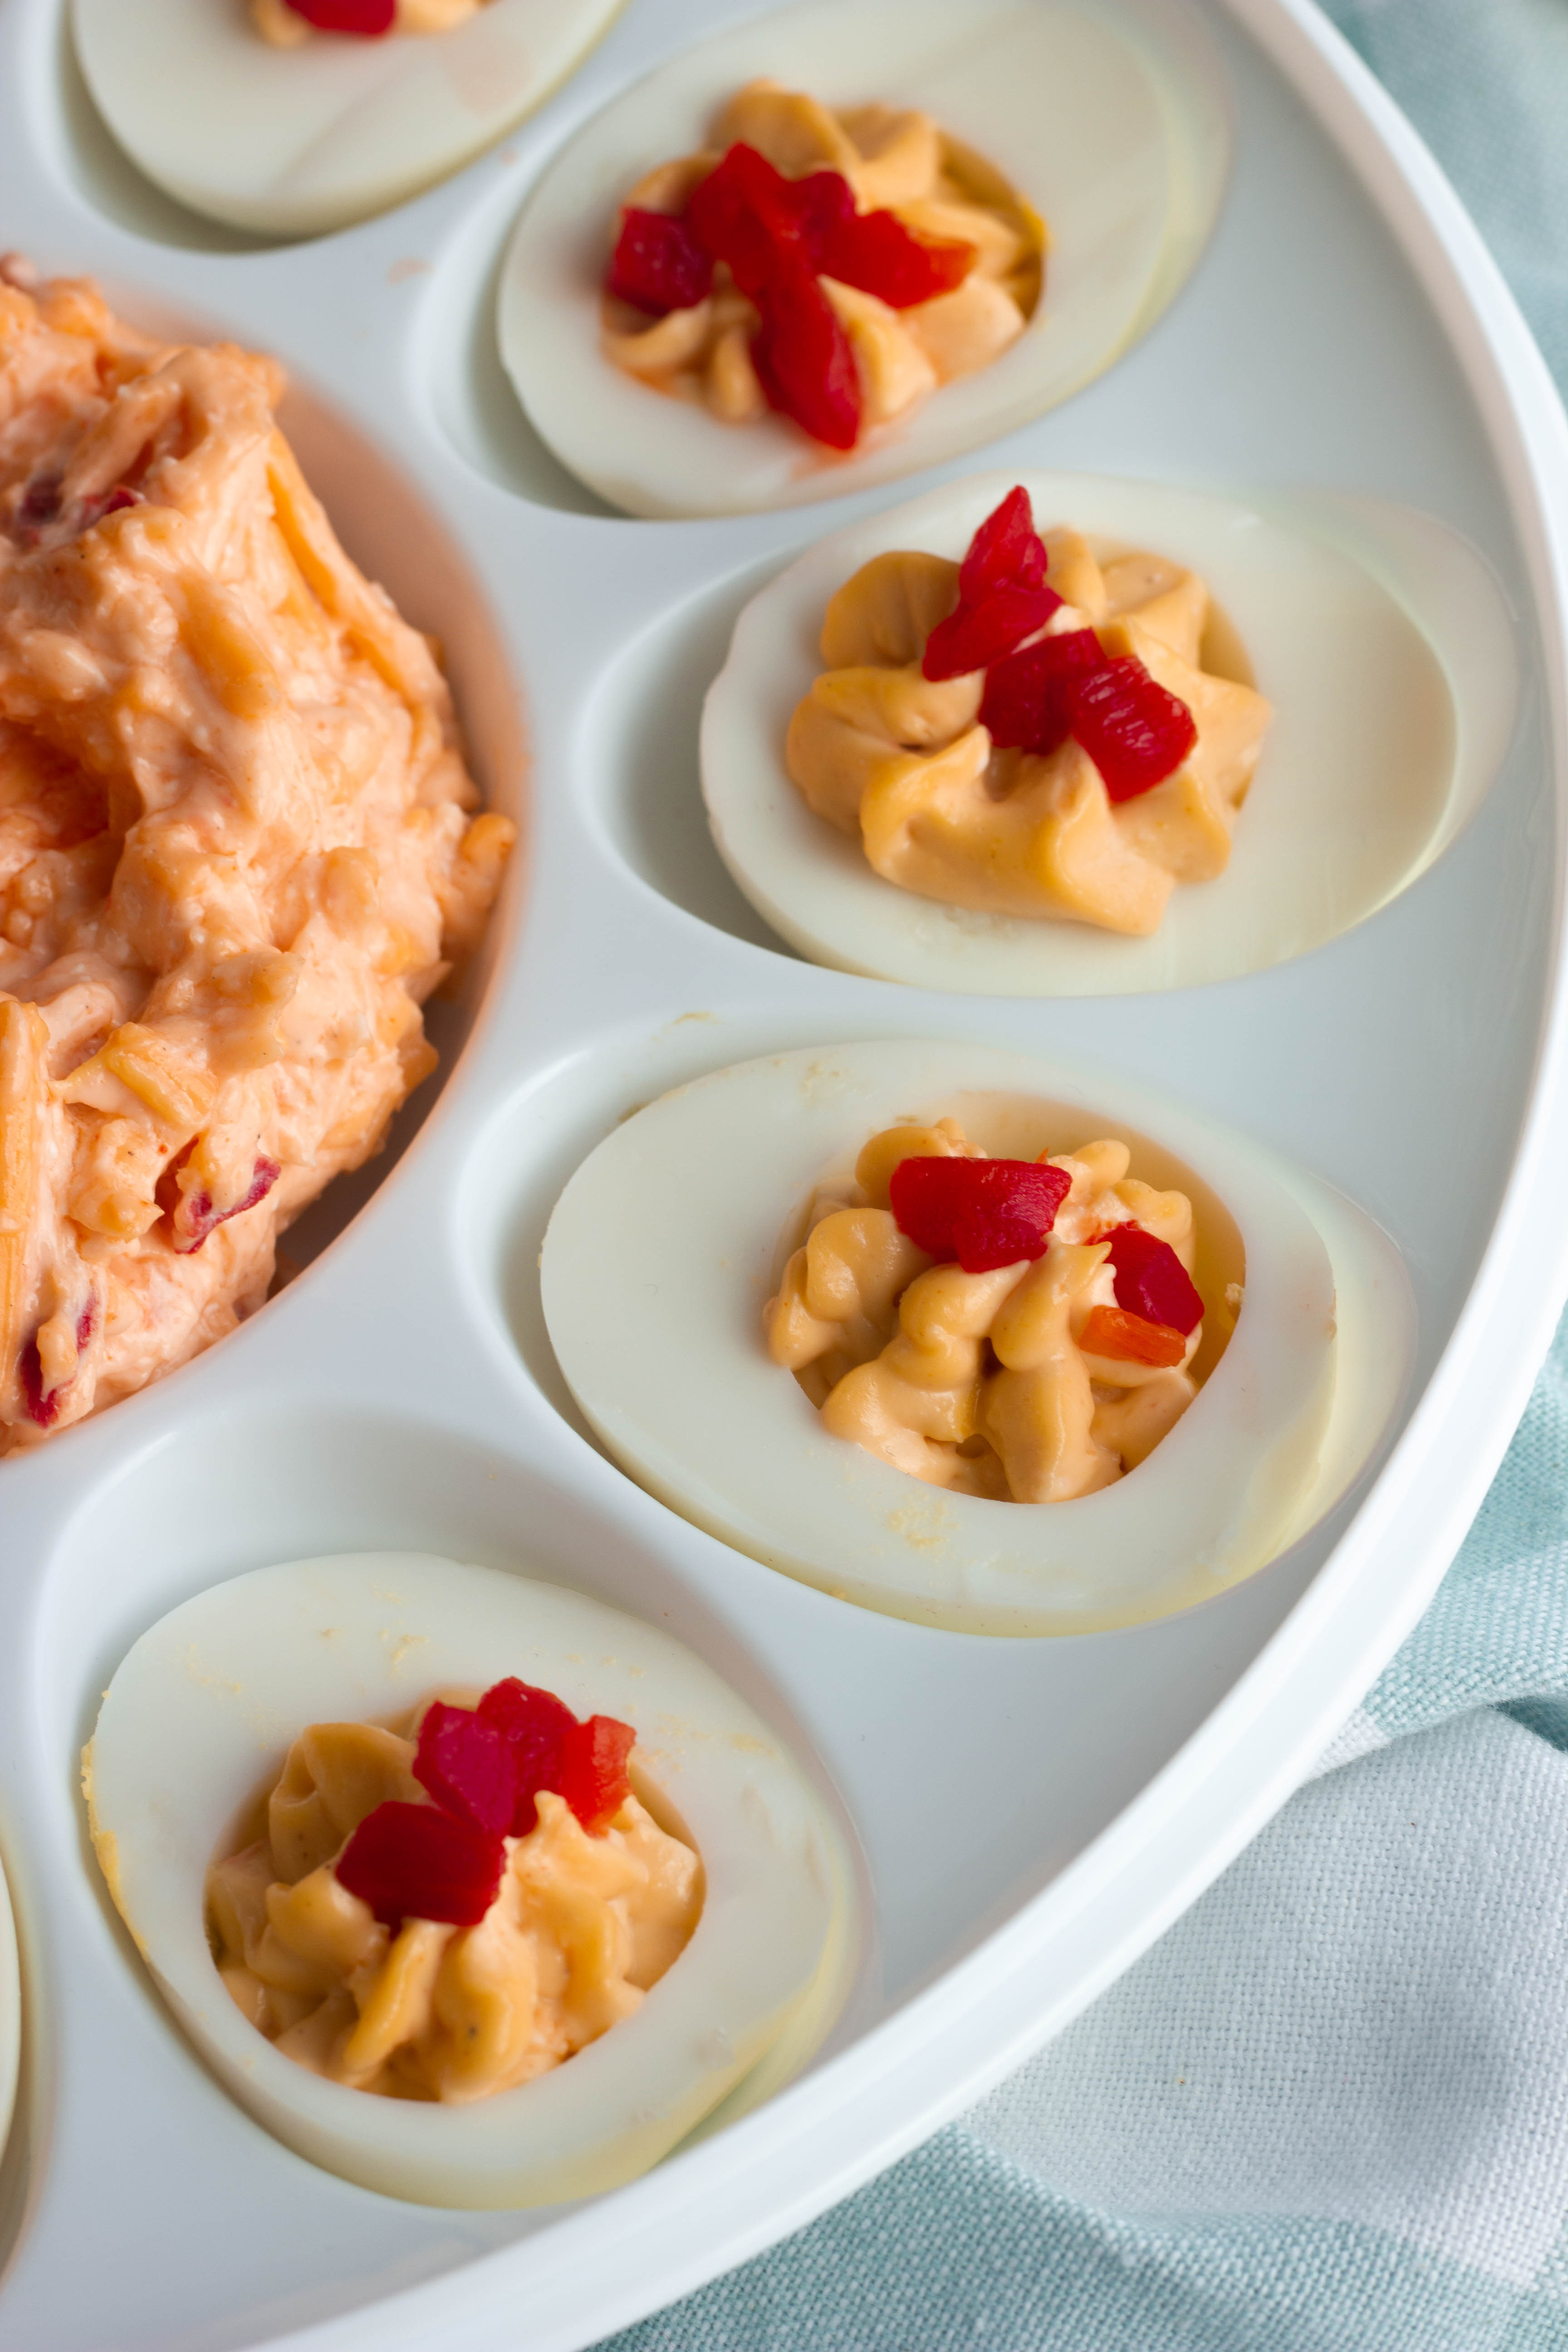 Classic deviled eggs give a nod to the South with these Pimento Cheese Deviled Eggs. A zero carb keto snack perfect for egg fasts or a Masters viewing party!